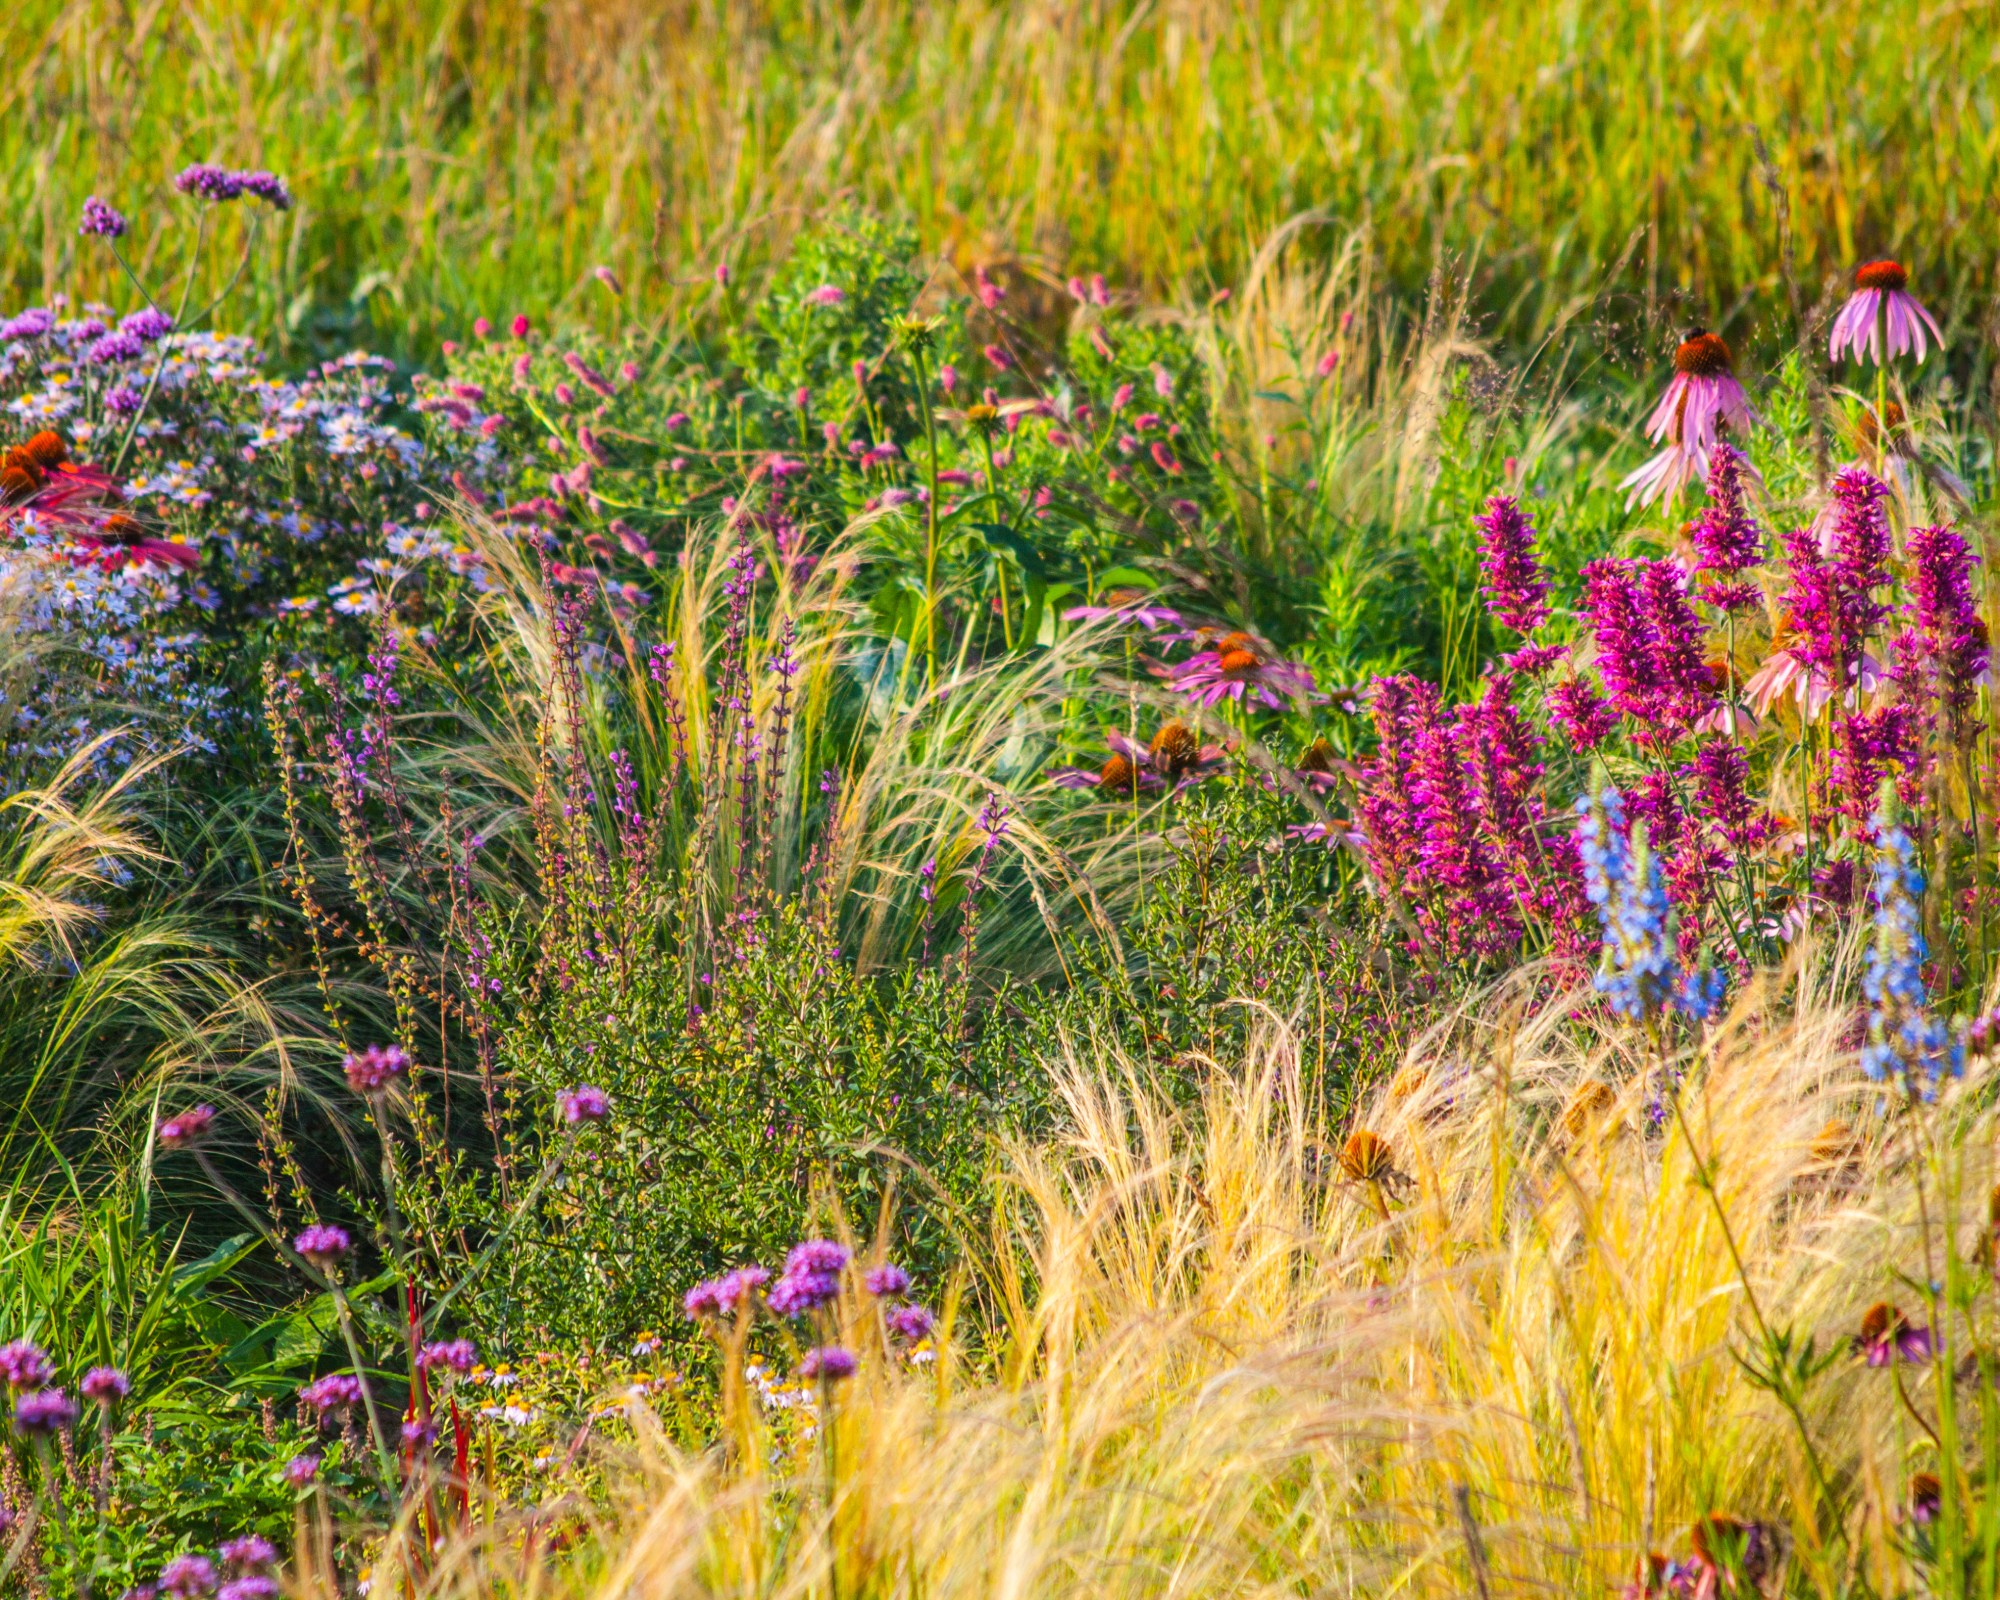 Asters, coneflowers, and ornamental native grasses in a meadow garden